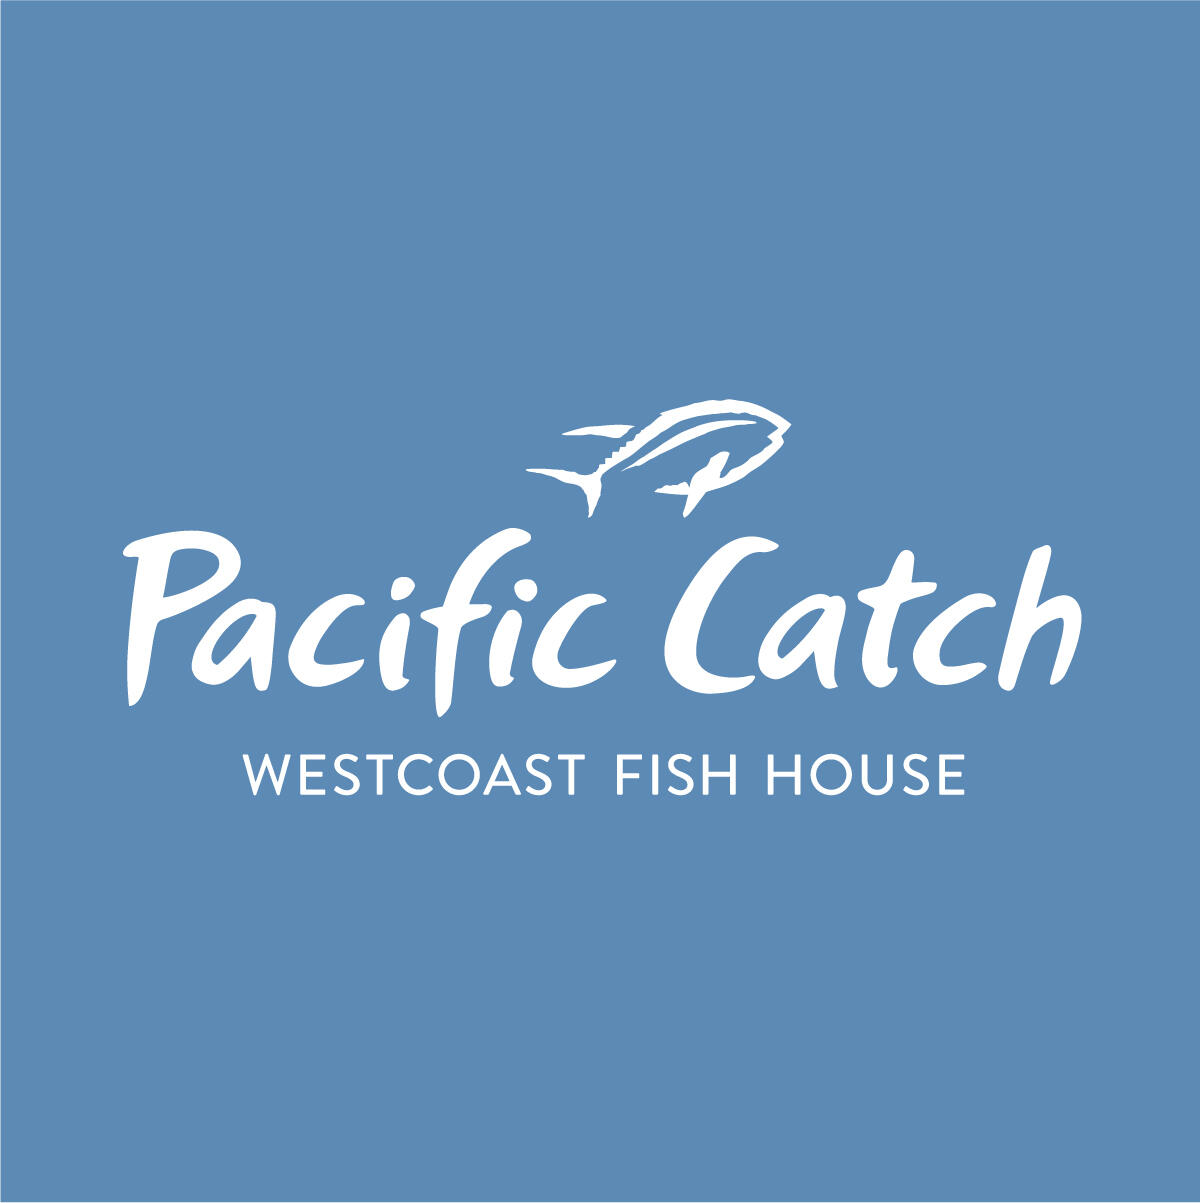 At Stanford Shopping Center - Picture of Pacific Catch, Palo Alto